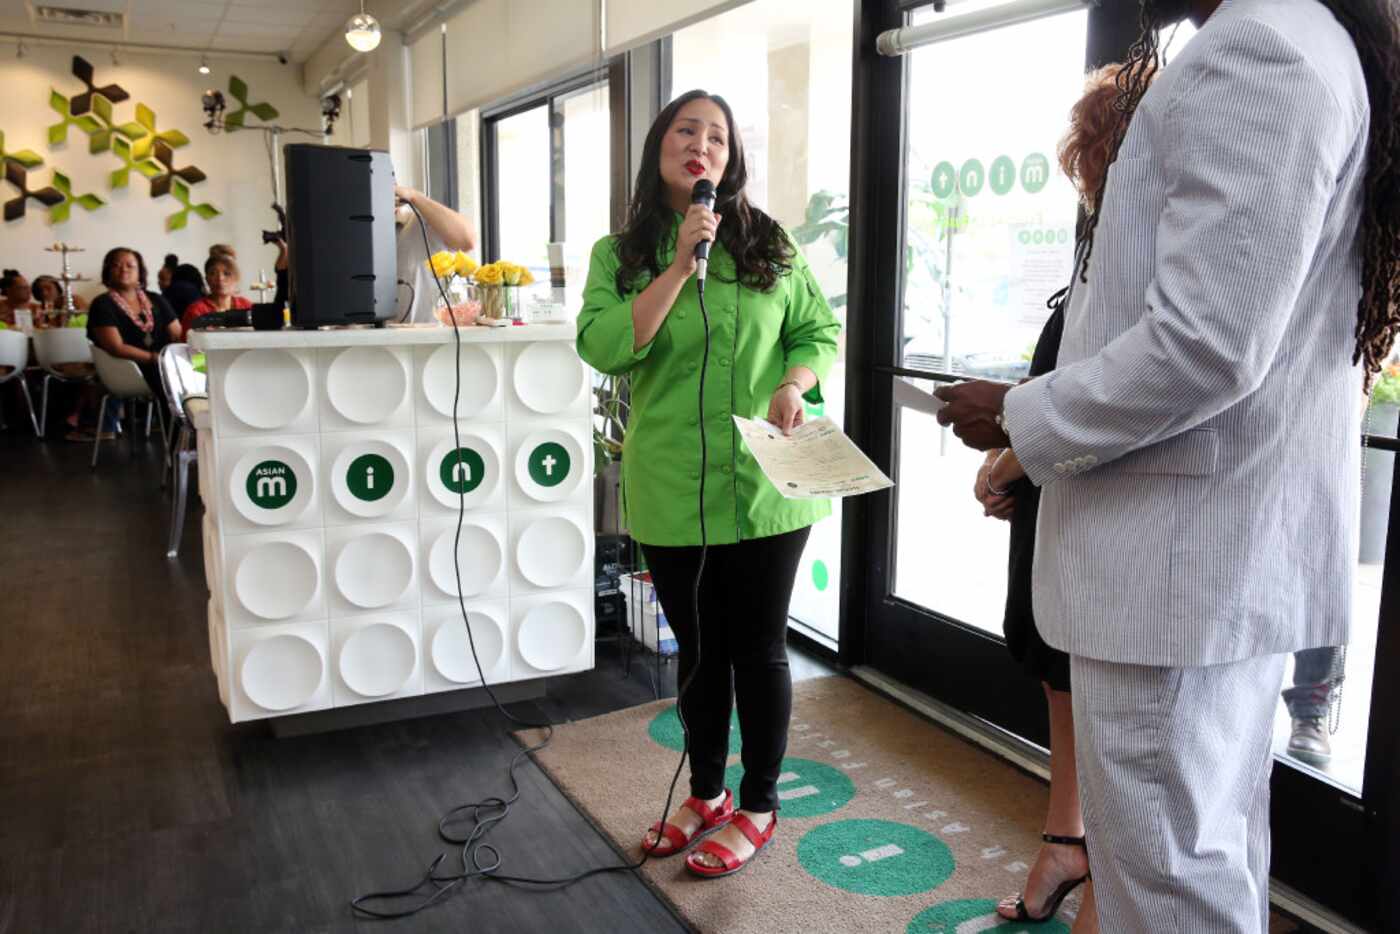 Asian Mint owner and chef Nikky Phinyawatana spoke at the fashion show event held June 4 at...